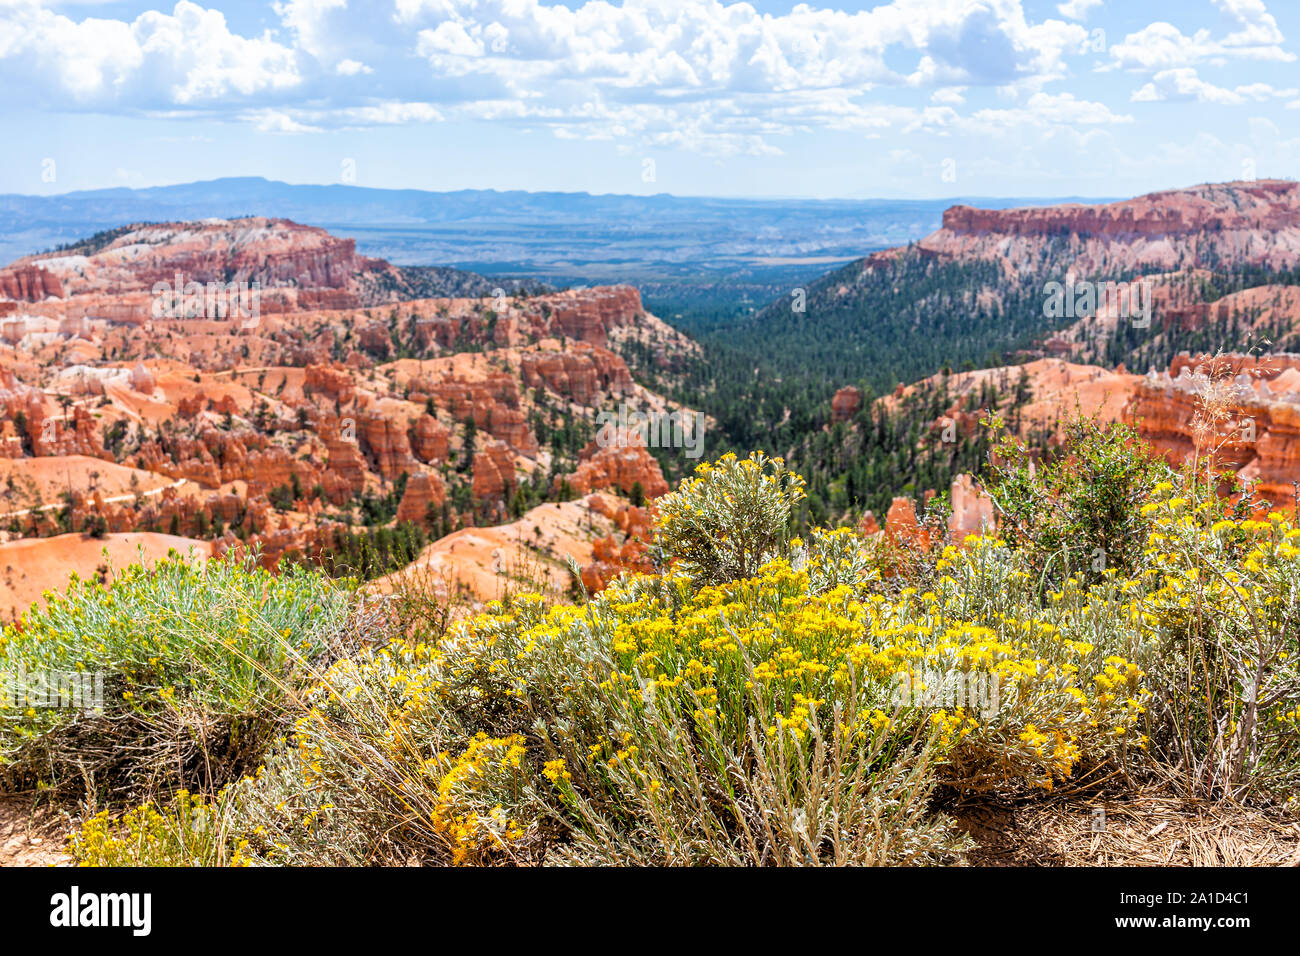 Landscape high angle view from Sunset Point Overlook cliff edge at Bryce Canyon National Park in Utah with yellow flowers in foreground during day Stock Photo